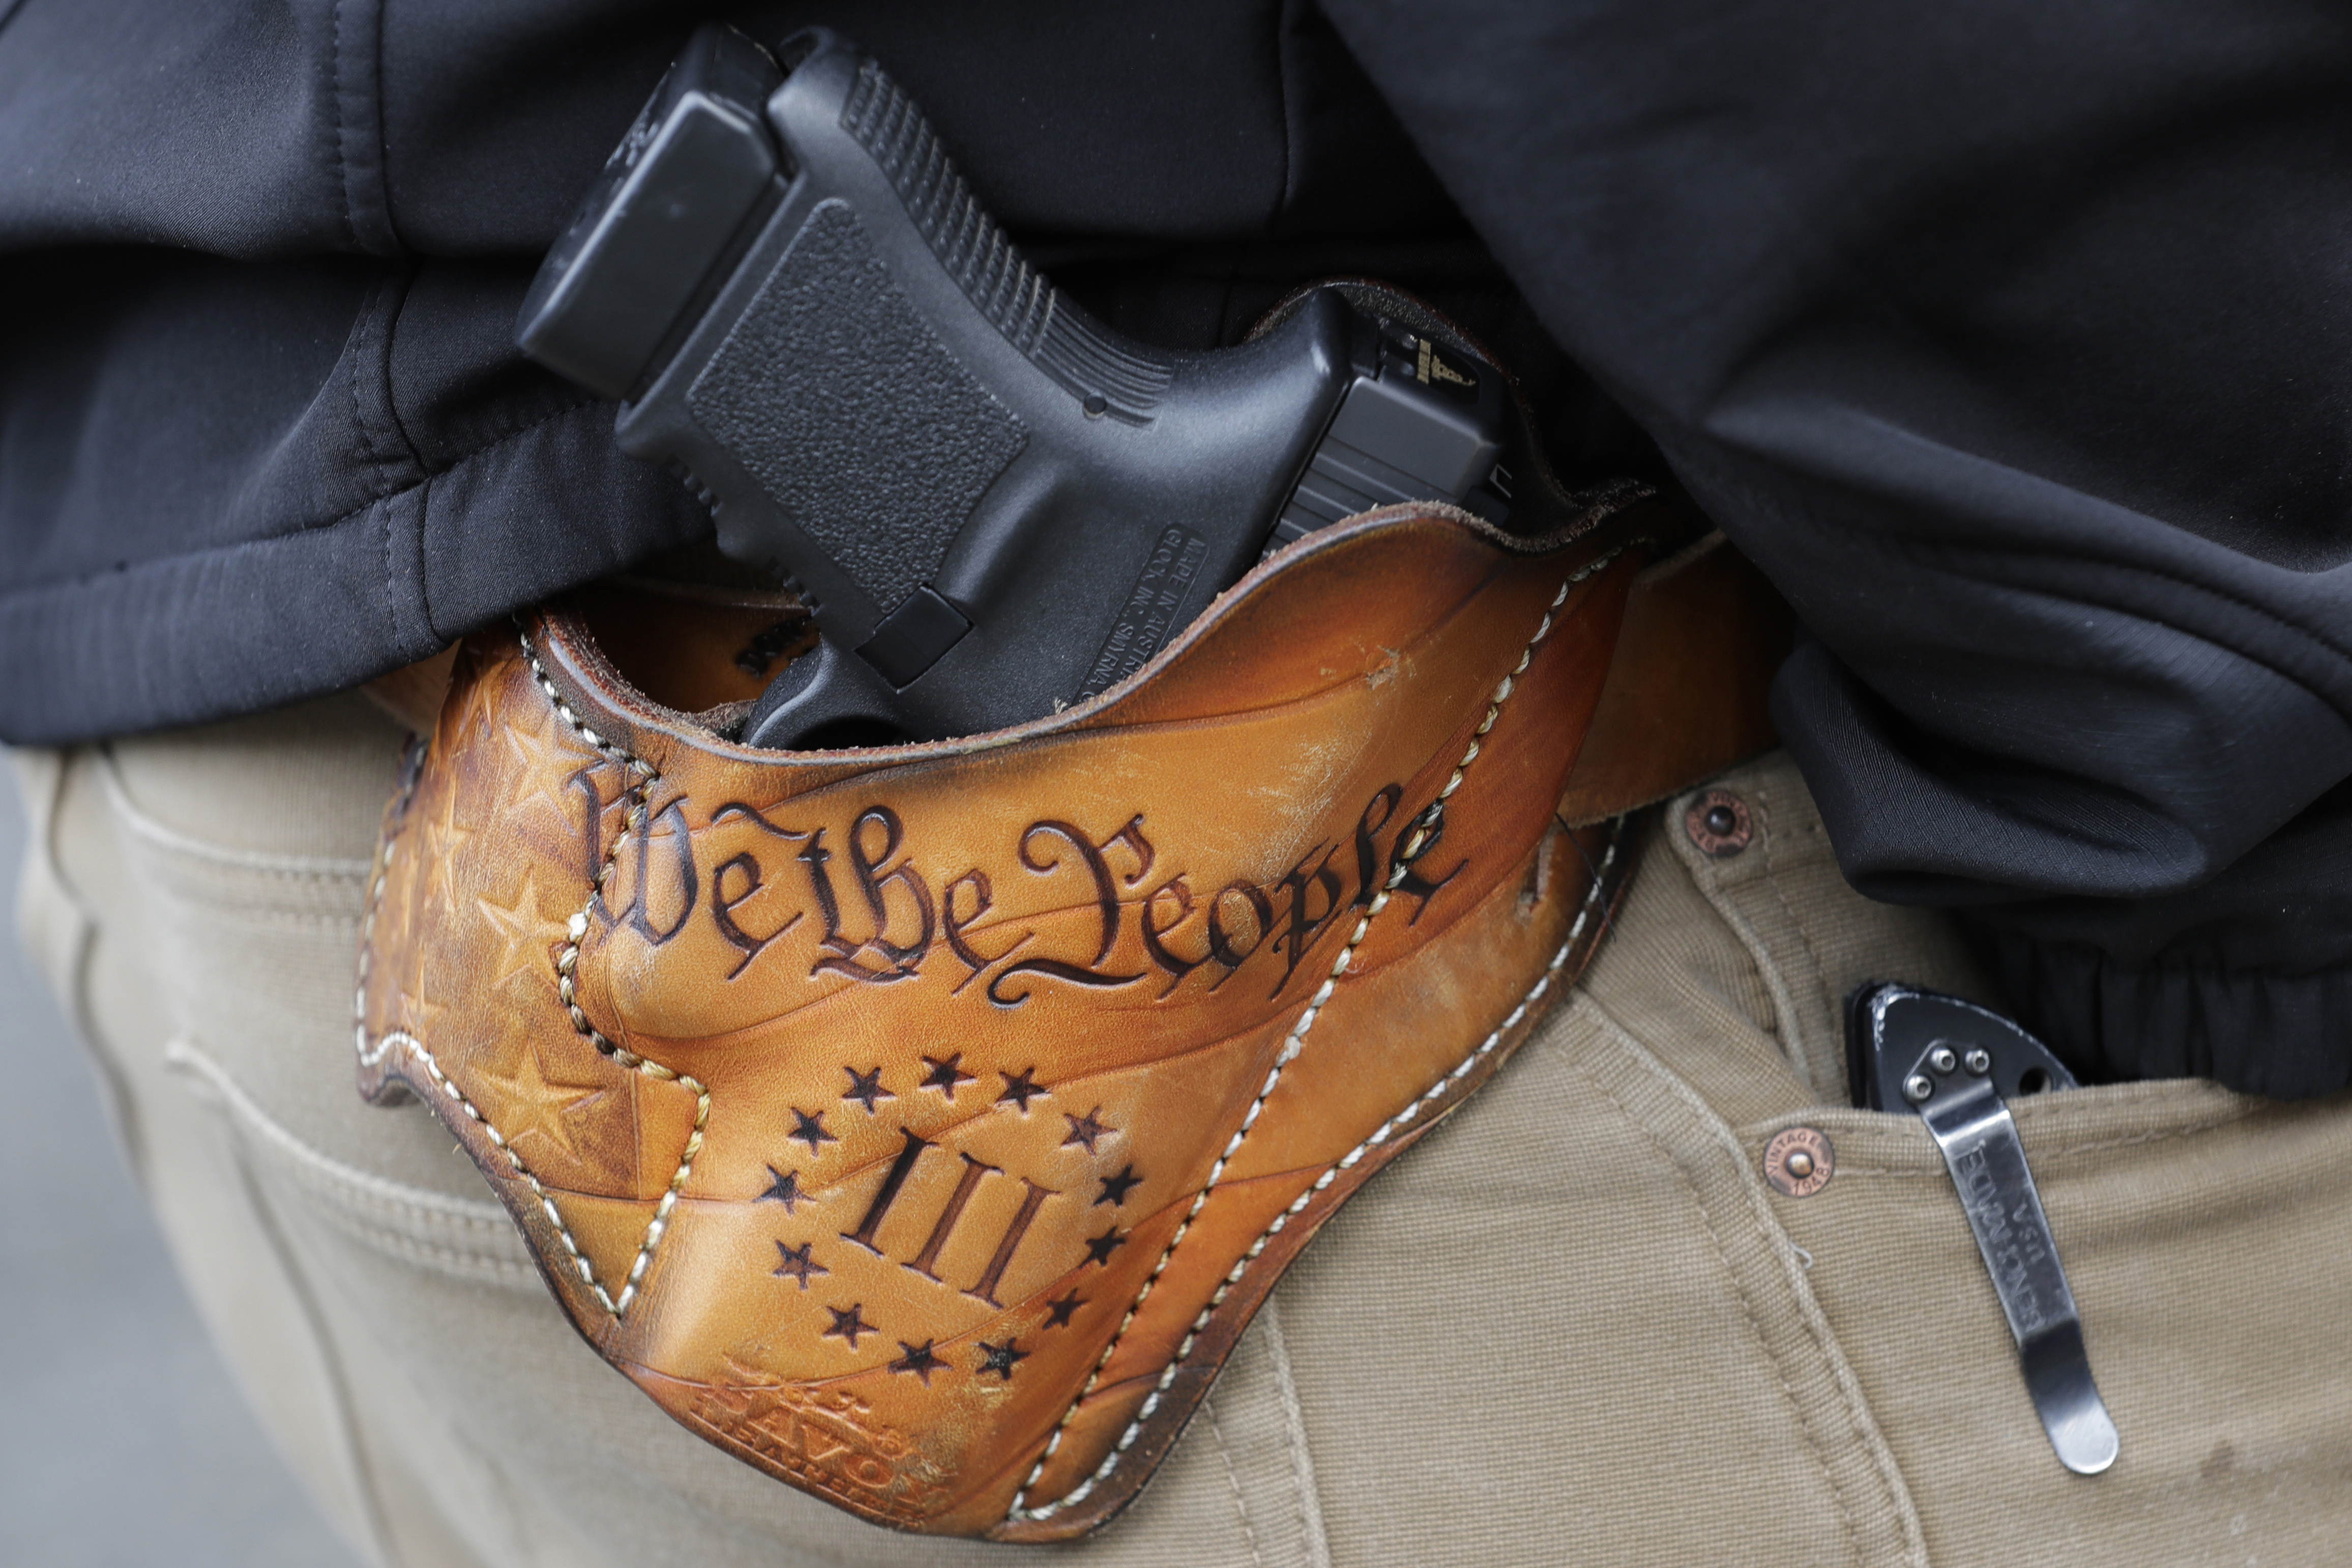 Permitless carry laws in some states raise new dilemmas for police officers